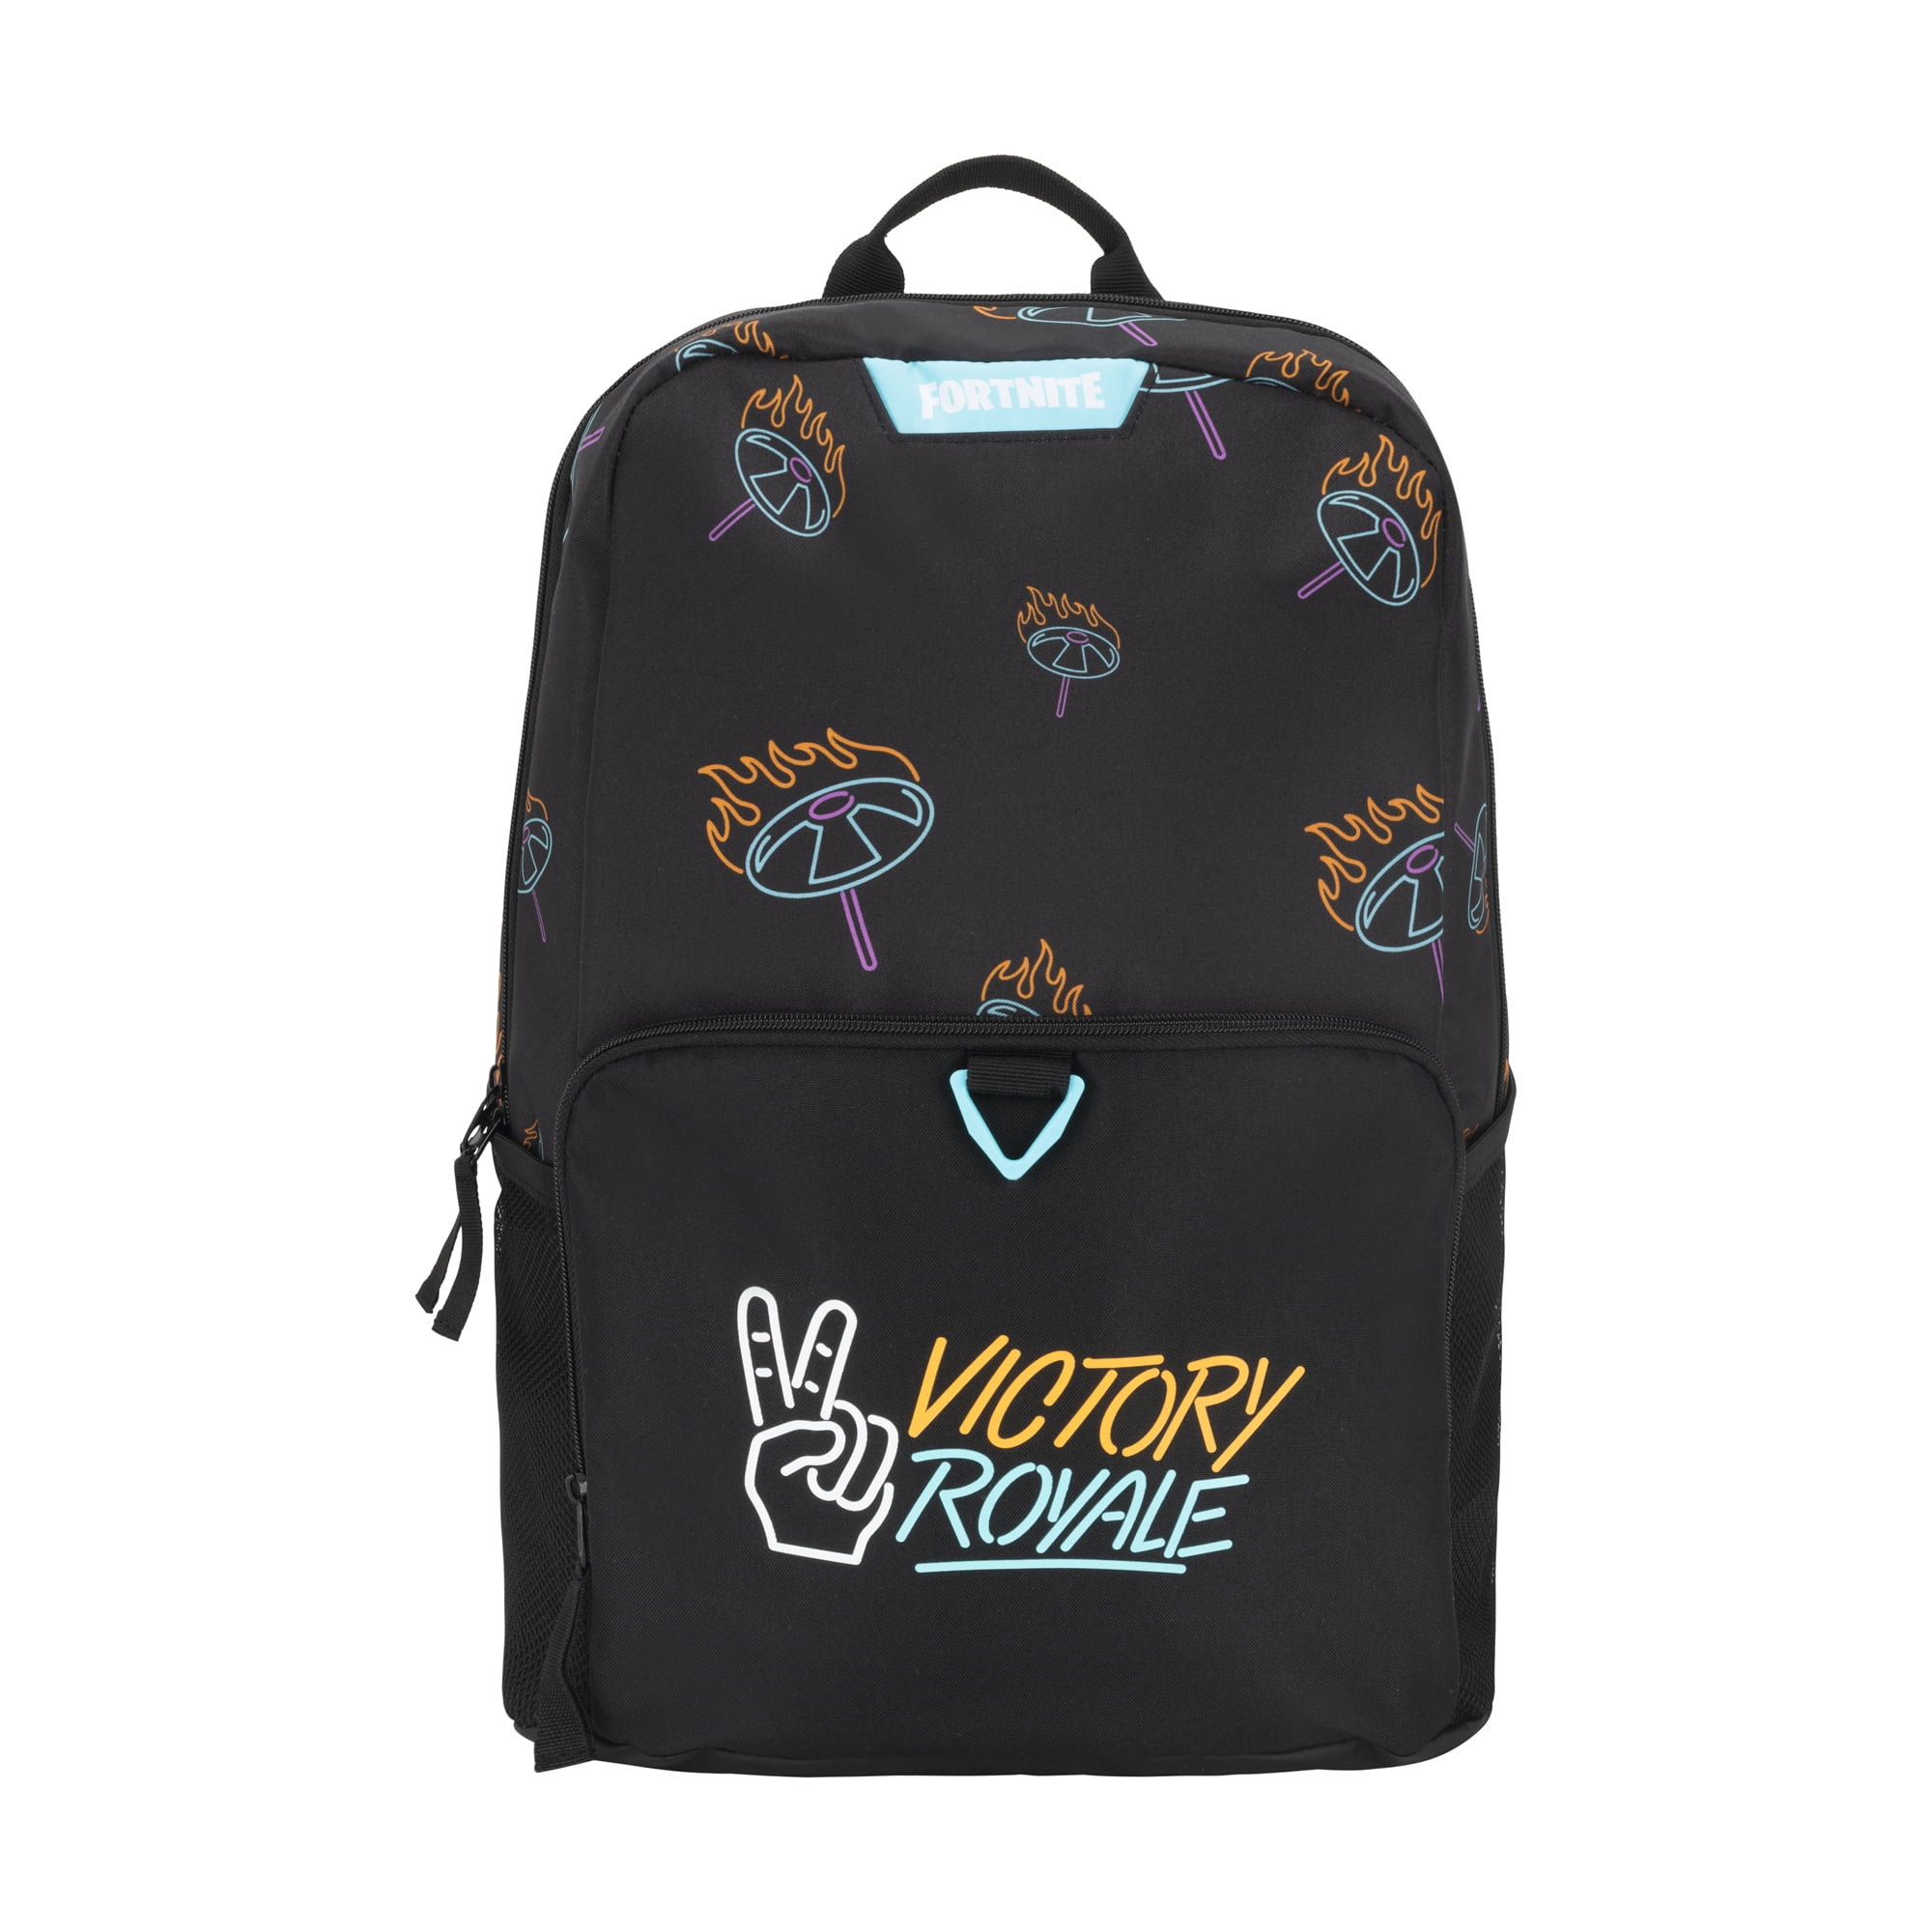 FORTNITE Black Amplify Patch Backpack w/ 2 Removable Patches Included